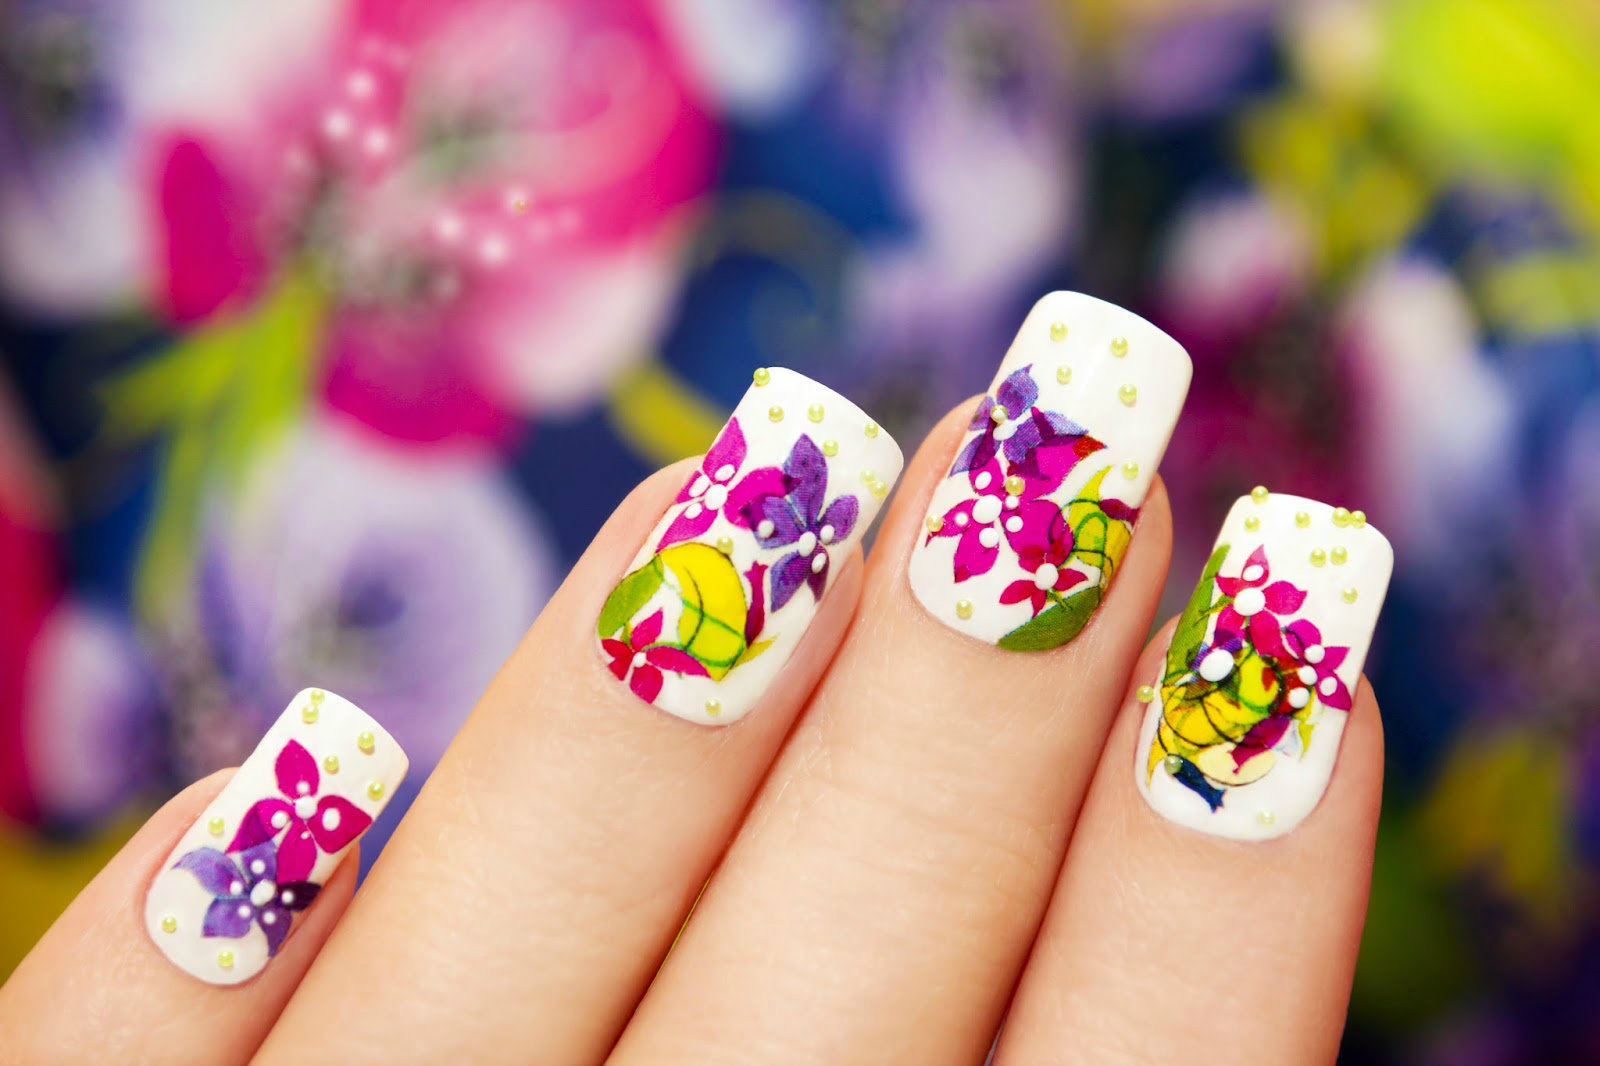 7. Nail Art Video Downloads for Professionals - wide 5